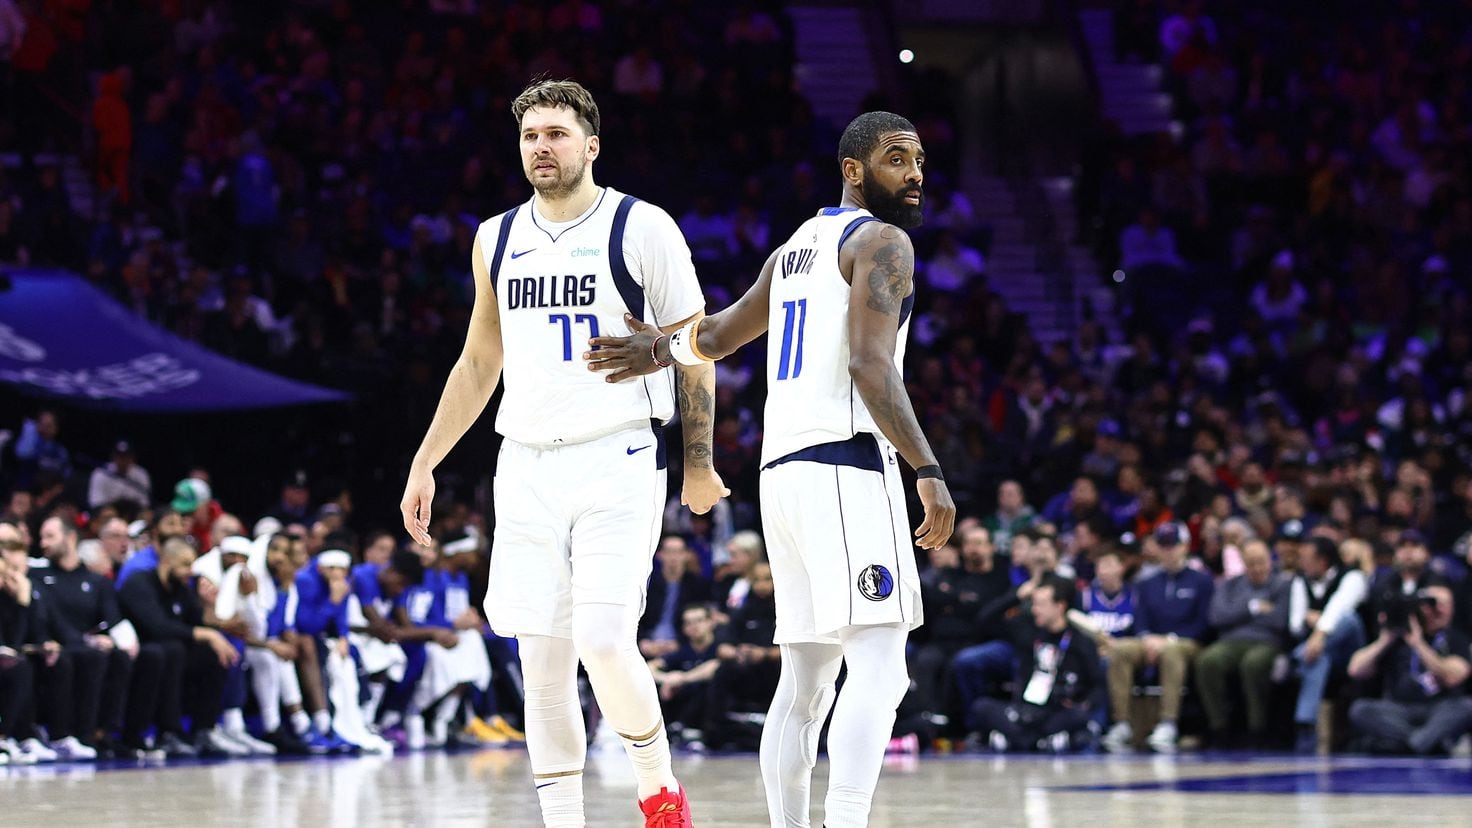 Irving and Doncic team up to take on a down-and-out Sixers team